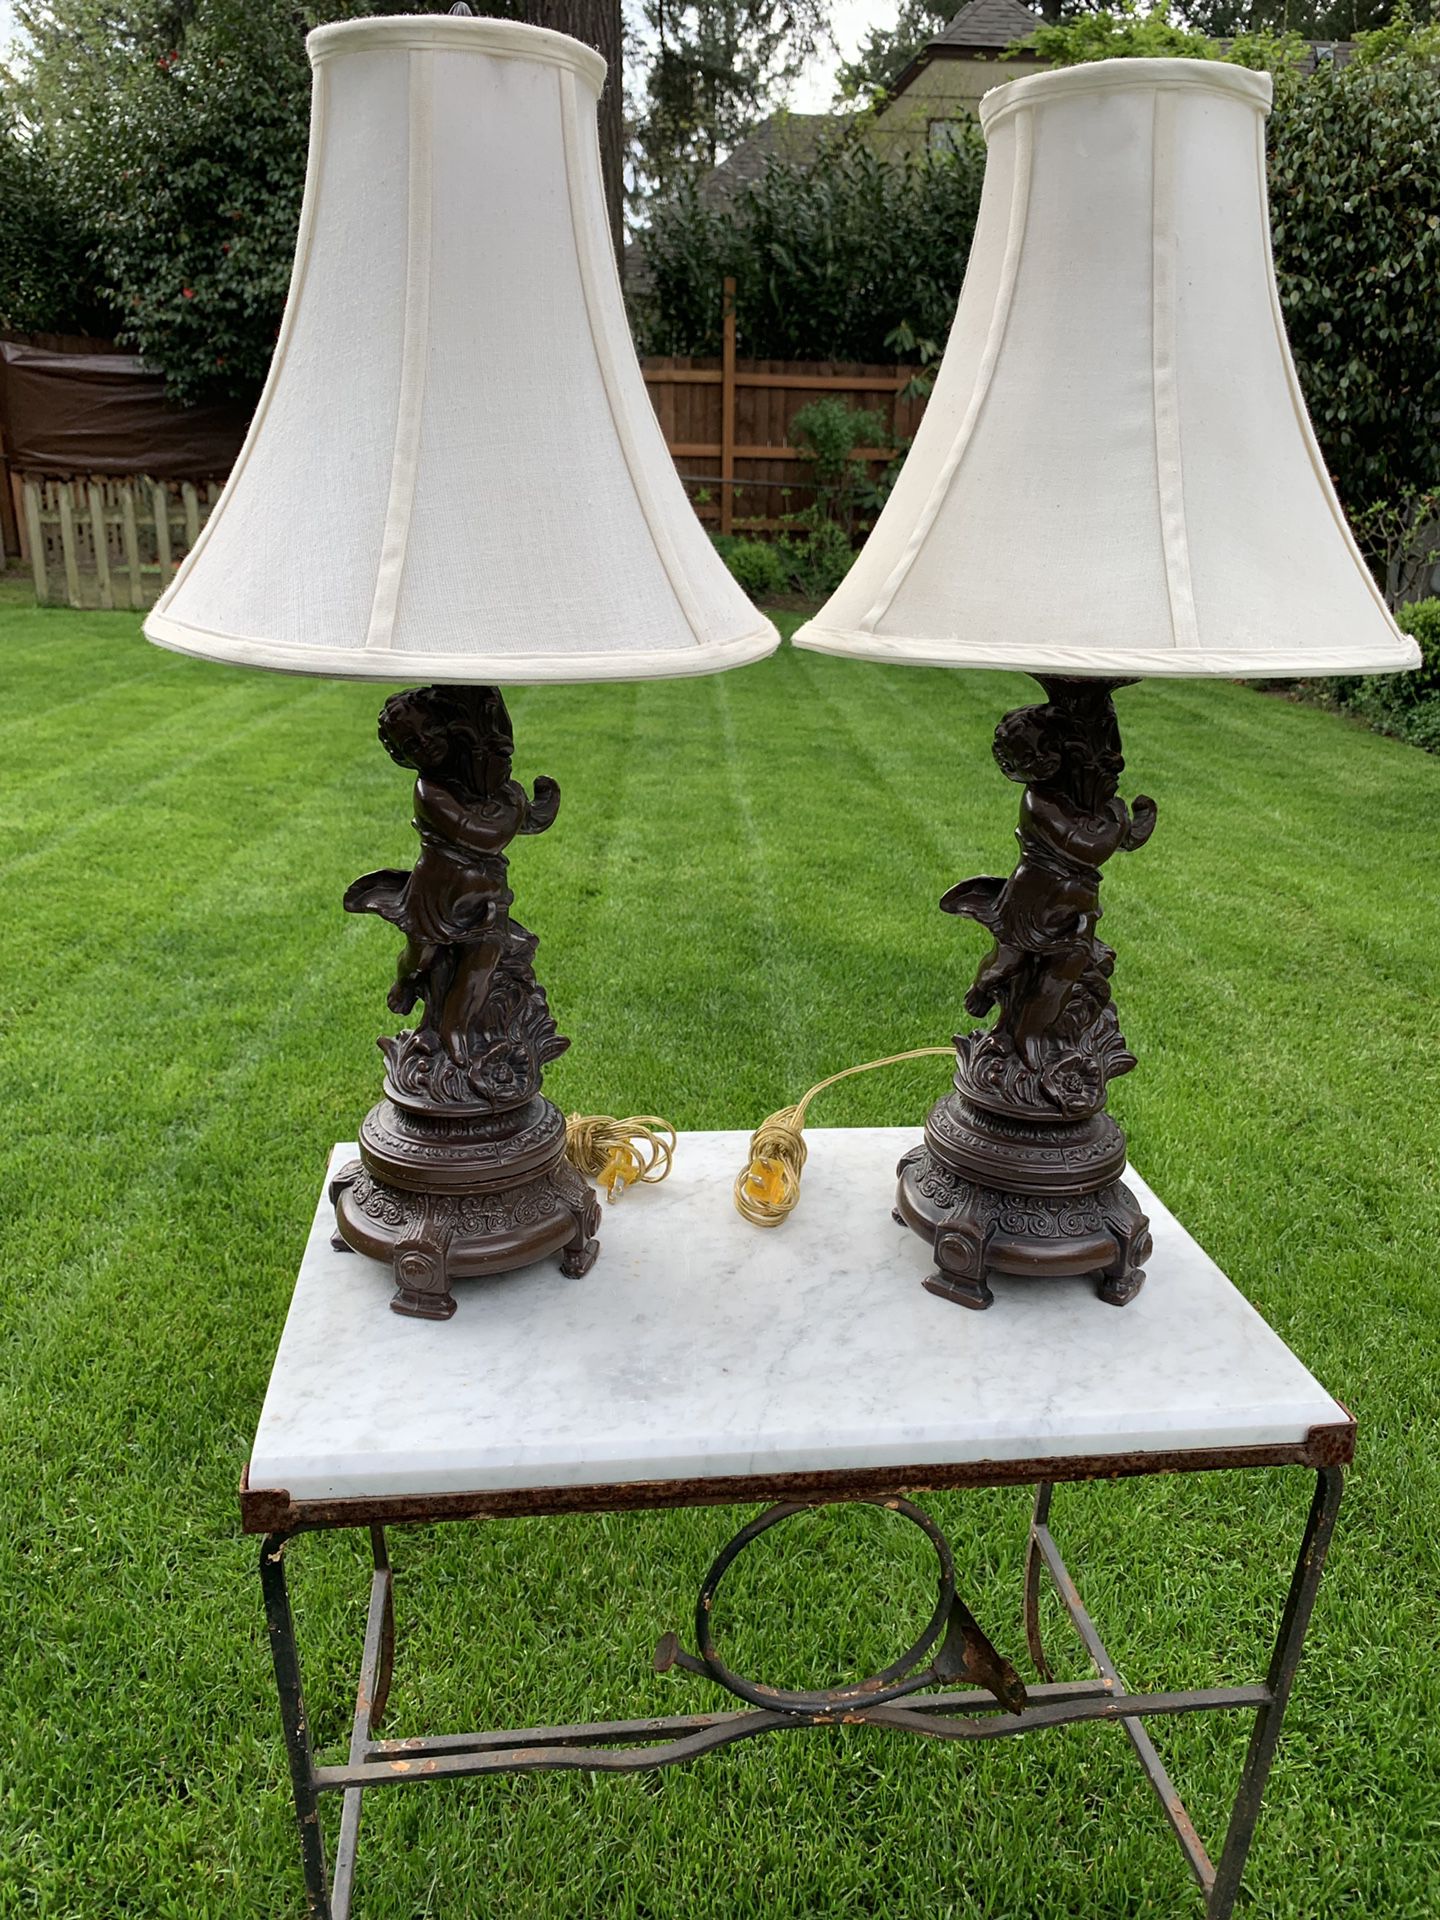 Beautiful Metal Cherub Lamps with Bell Shaped Shades